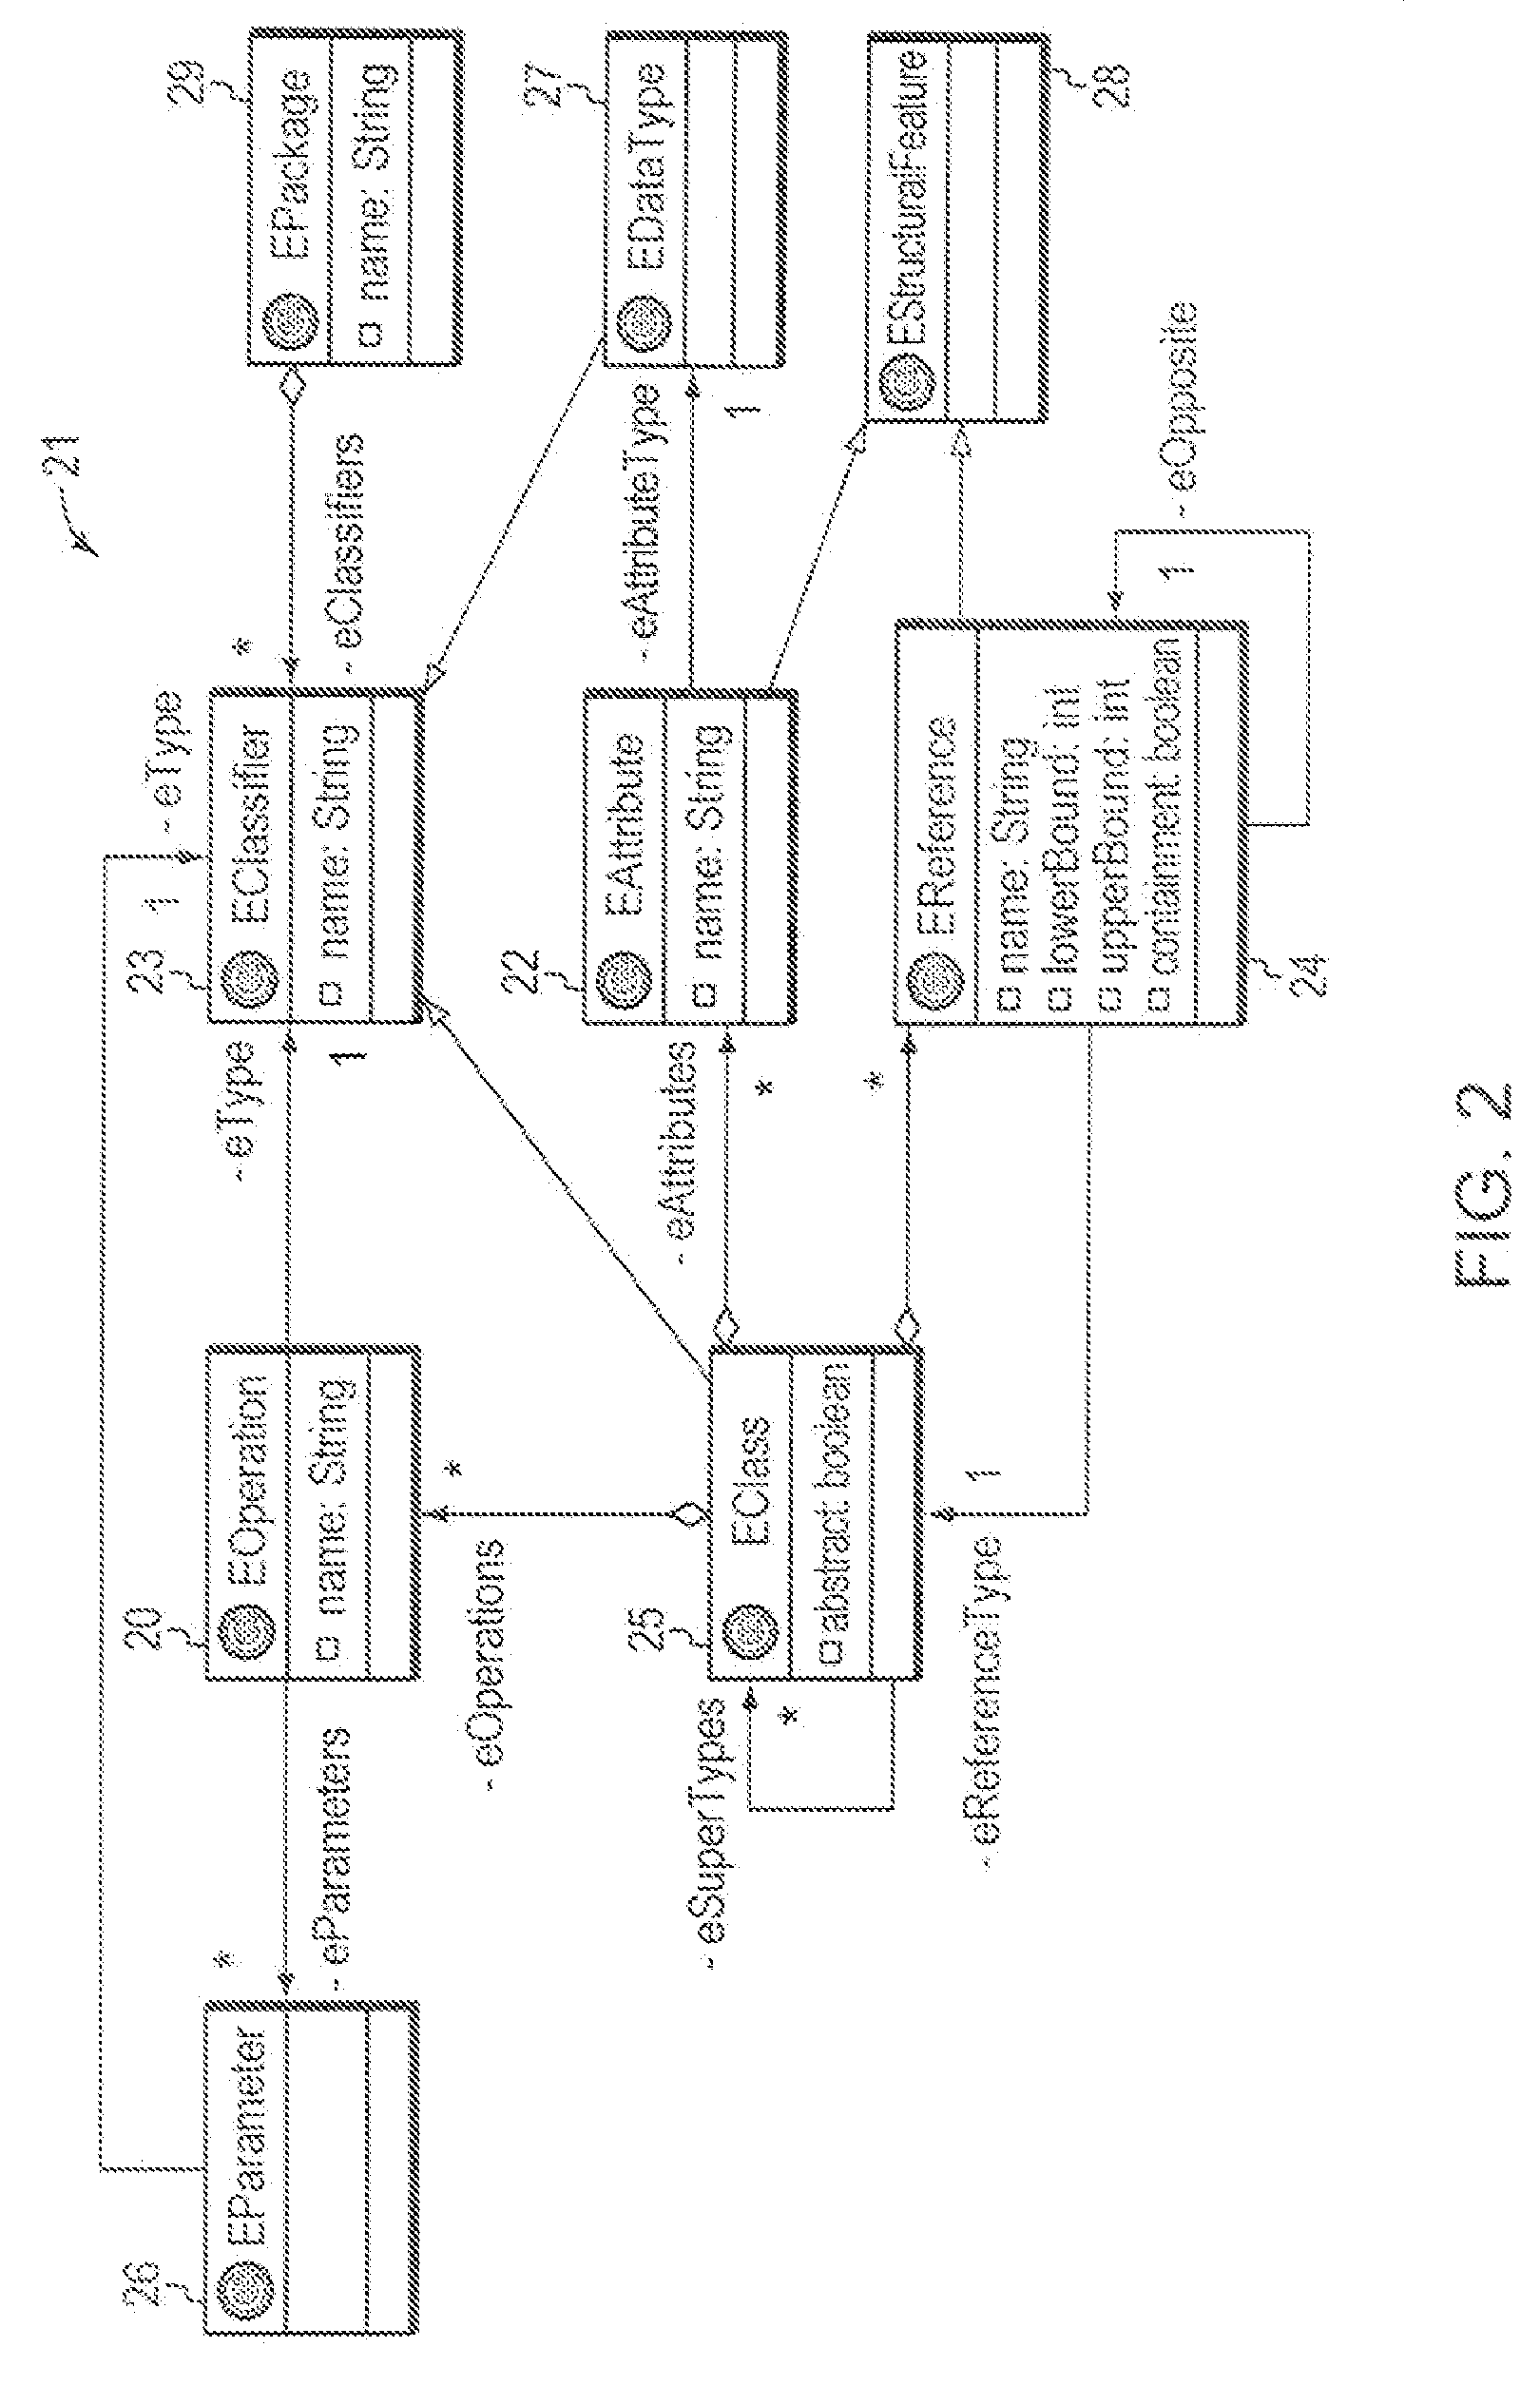 Computer Method and System for Pattern Specification Using Meta-Model of a Target Domain